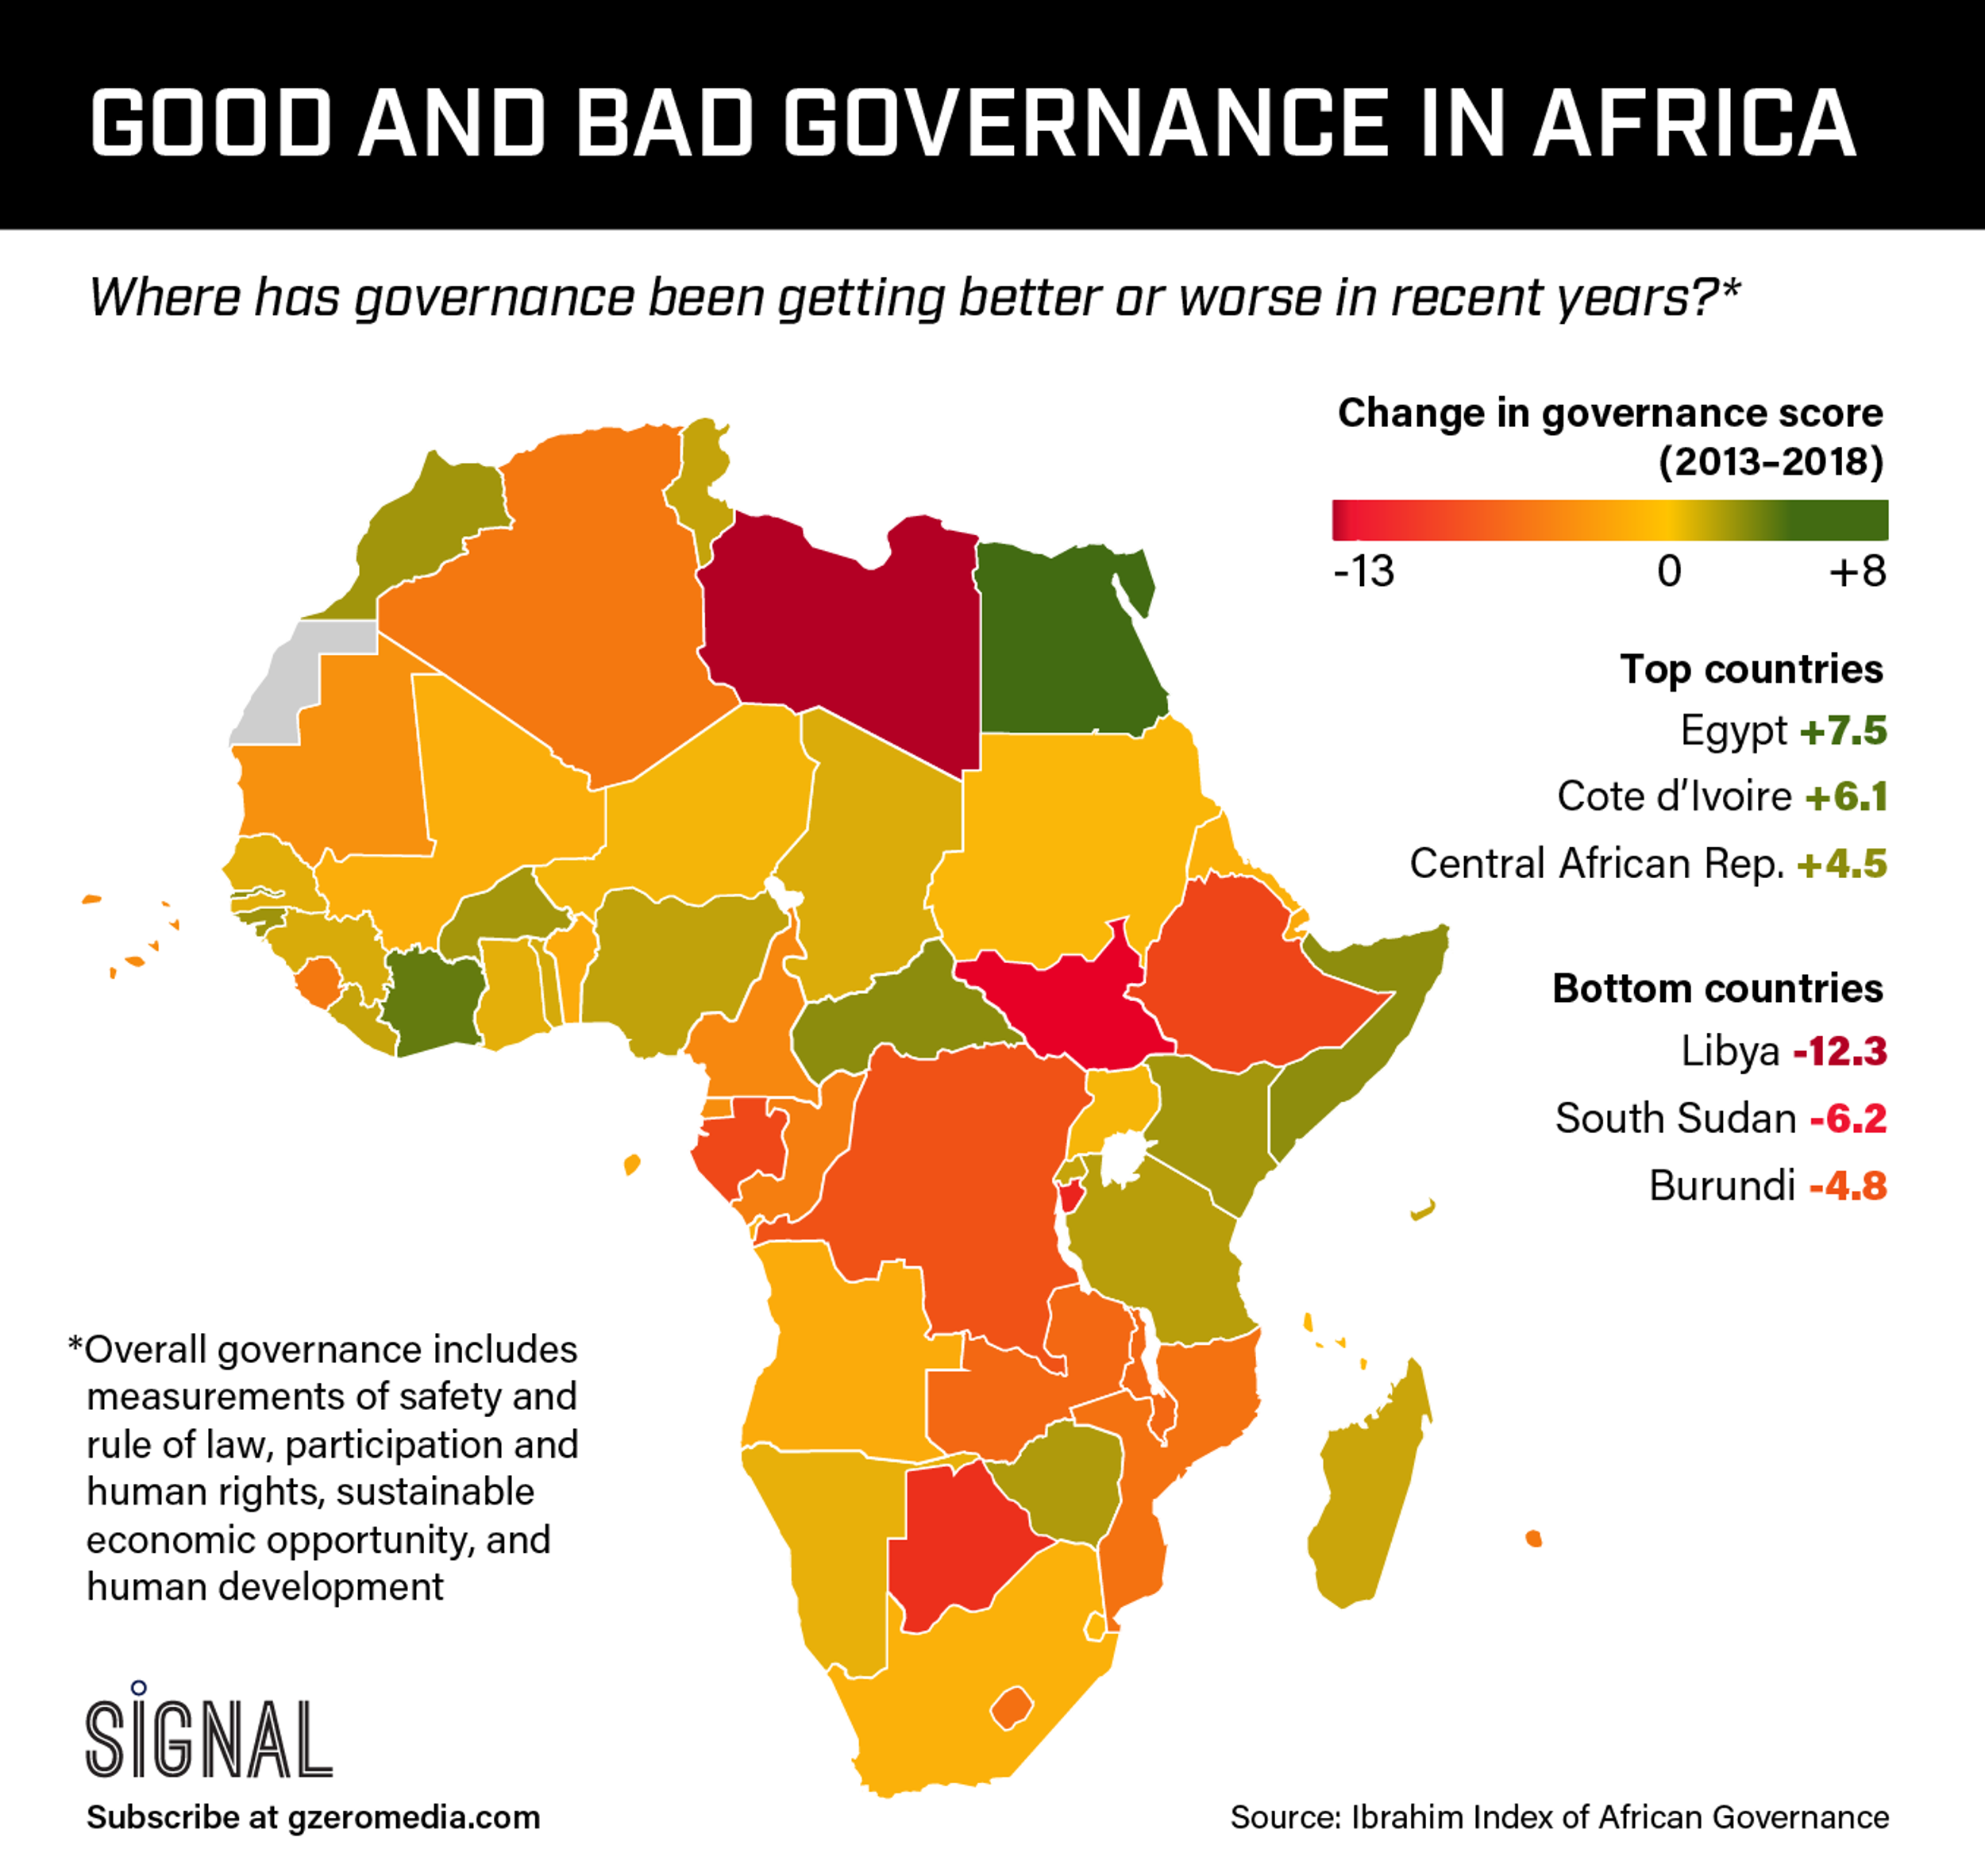 THE GRAPHIC TRUTH: GOOD AND BAD GOVERNANCE IN AFRICA